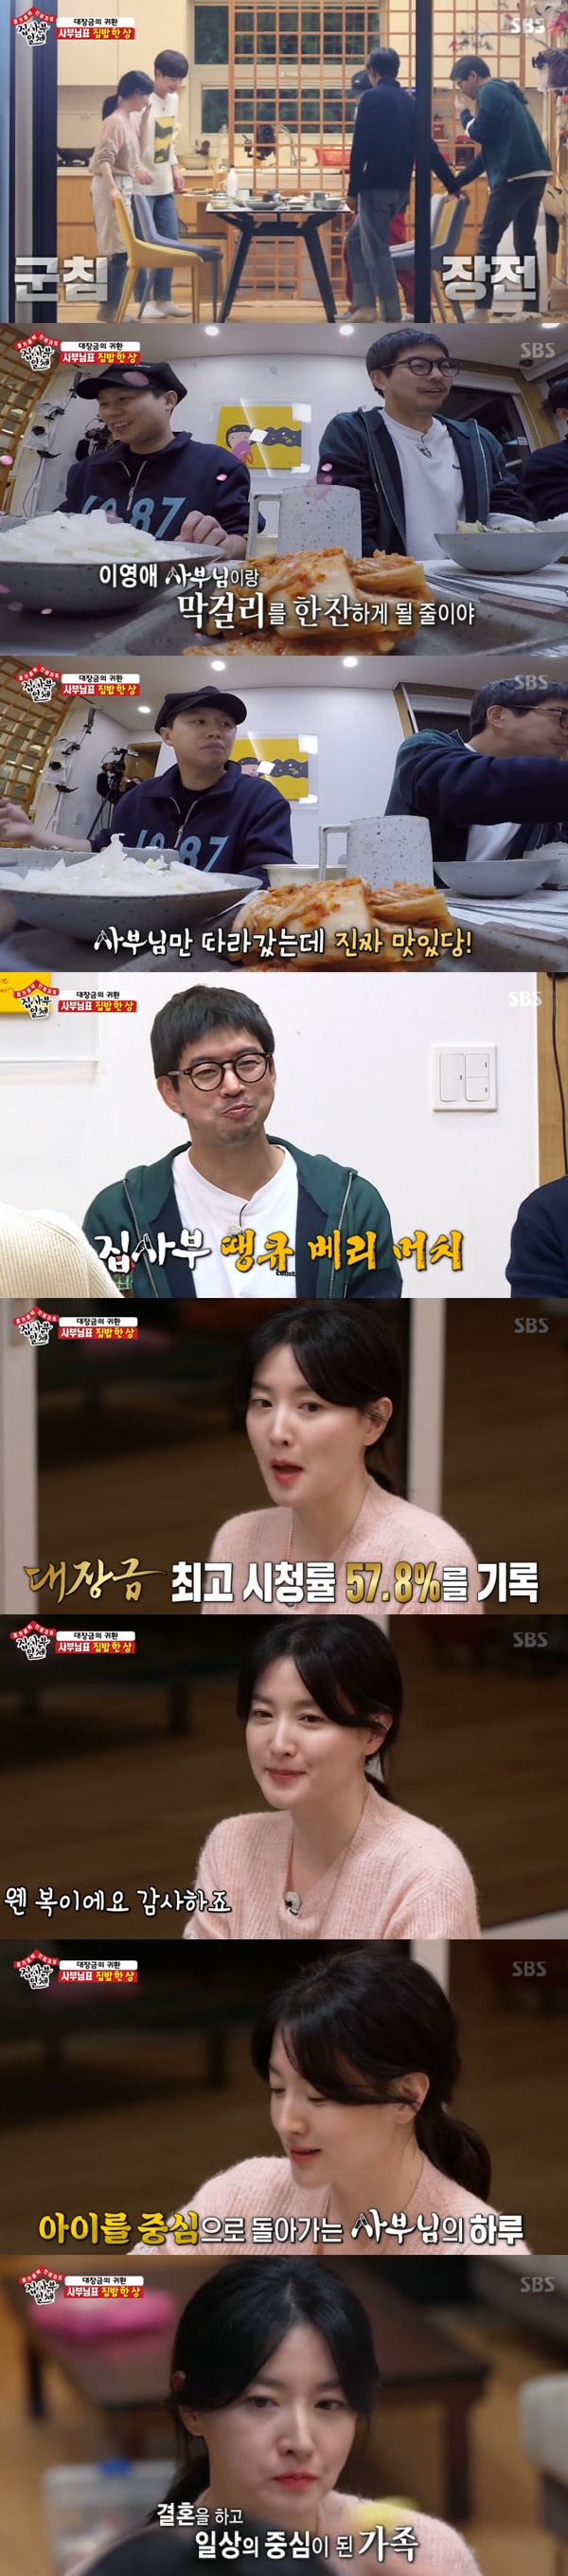 All The Butlers Lee Yeong-ae has revealed her mothers daily life, not an actor.On SBS All The Butlers broadcasted on the 1st, Ascension Hyungjae members had a good time with Master Lee Yeong-ae.Master Lee Yeong-ae, members who had a good time with her I-DLE. By evening, the master prepared a handmade meal with ingredients from the garden for the members.The members who tasted the traditional Korean traditional dish made of cabbage and oyster cabbage soup showed a stormy food by pouring exclamation to the masters cooking skills, It is really so delicious and What is this?At this time Lee Seung-gi asked, Dae Jang Geum TV viewer ratings came out 50%? And Lee Yeong-ae laughed.When we said Dae Jang Geum TV viewer ratings were over 80% in a Middle East country, Lee Yeong-ae said, its nearly 90%.Lee Yeong-ae said, When I walked with the groom and Itaewon, there were some people who gave flowers to Middle East.Mom Lee Yeong-aes day of work has also been revealed.Lee Yeong-ae said, I go to school in the morning and follow a lot of childrens schedules. I get married late and know more about the importance of my family.Im trying to be with I-DLE as much as I can, he said.Lee Seung-gi said, When I saw it, I thought, I would be happy if I had a family. Lee Yeong-ae said, It is a great strength.In particular, Lee Yeong-ae said, There was no fear of marriage. There was a worry about the fans disappearing in their 20s and 30s.The more I think, Lets make roots that do not shake even if I come back. I thought about it and ran hard in my 20s and 30s. In addition, after taking a TV commercial during his rookie days, he shared the truthful story of the master who had not done anywhere in the past, such as the old anecdote that had to work part-time chocolate sales.Later teatime time: Master Lee Yeong-ae and members talked about the importance of praise; Lee Yeong-ae practices expression.I love you, thank you, and always hug you. I practice it so that you can express it as delicious.Asked about the praise of the best I-DLE, he laughed, It is best when you say the food your mother gives is the best.The members decided to call their acquaintances and have time to praise them.Yang Se-hyeong called Park Na-rae and praised Yang Se-hee, saying, Its so cool to come to Park Na-rae now. Park Na-rae praised Yang Se-hyeong, saying, Why are you so grateful?SNS writing is also impressed and sometimes empowered, said Yook Sungjae, who said, There are many cases of opposition.Lee Yeong-ae said, It seems important because friends who make their debut early are very weak to judge themselves, so they are wielded by horses, worry about themselves, and see that there are many bad things, so they can save and kill people.Lee Seung-gi said, It seems like these days when good words, praise words are really desperate.Meanwhile, members who left for New Zealand at the end of the broadcast were also revealed.Prior to leaving the station, the members gathered at the station received an invitation from the master, where it read: Only those who challenged and enlightened in nature deserve to be invited to my dream land.At this time, the production team said, The master will visit you directly at the moment of unity with nature.After that, the members played a game of pocket money, singing and proceeding to 100 bills. The first place will be Choices with the number presented by the master.As a result, Lee Seung-gi scored first, and he Choices the numbers 100 and Yang Se-hyeong.Since then, the members have raised expectations for New Zealand in anticipation.